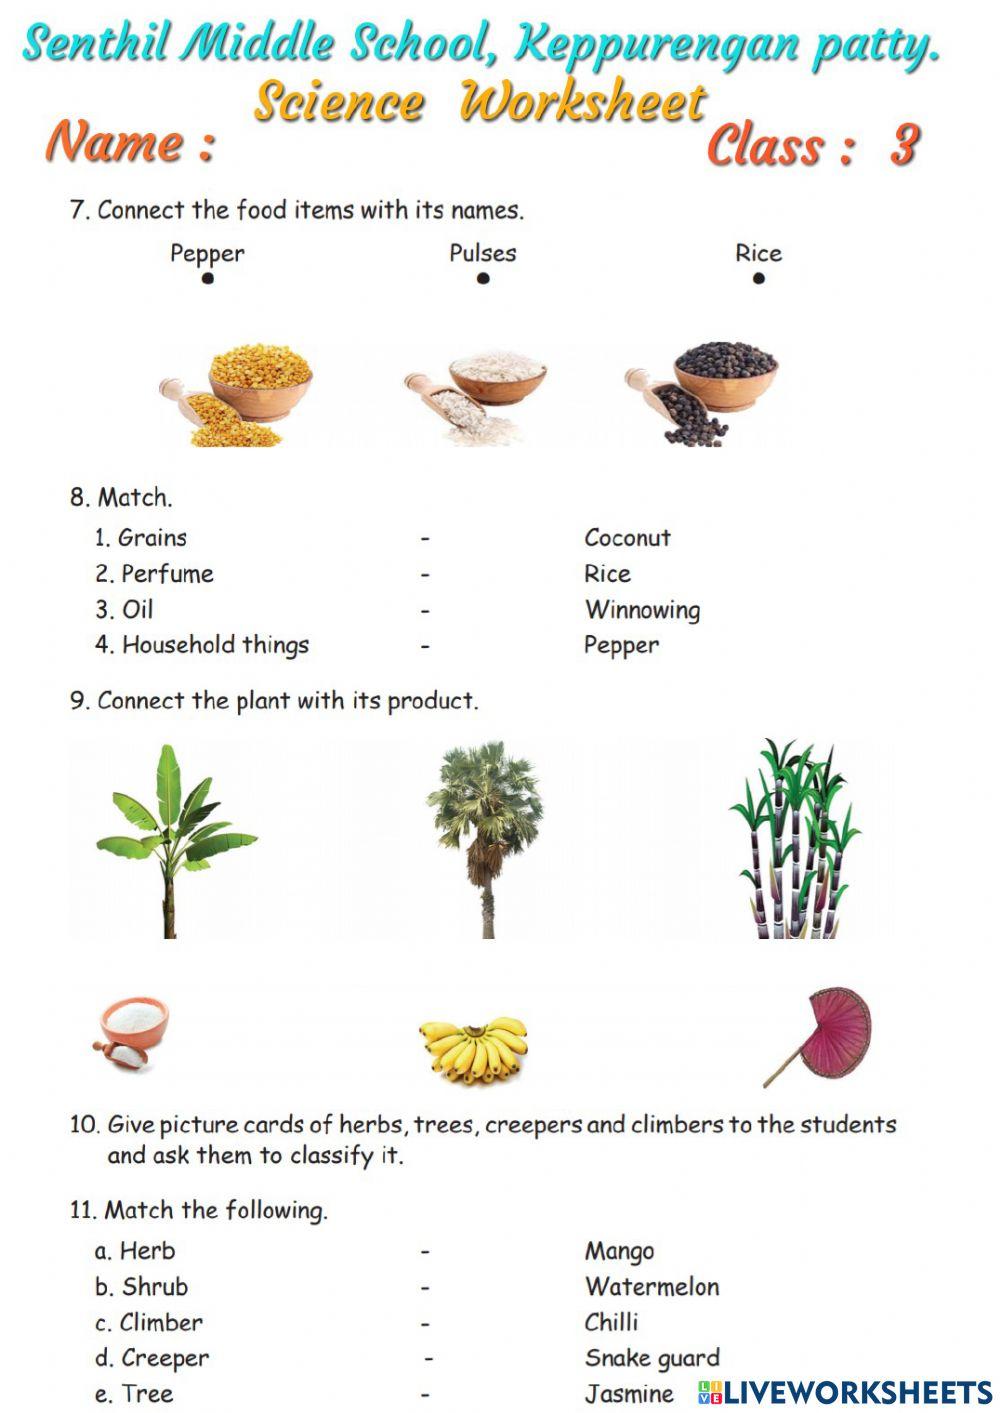 SENTHIL MIDDLE SCHOOL,KEPPURENGAN PATTY- CLASS:3 SCIENCE ONLINE WORKSHEET- PARTS OF THE PLANT- PREPARED BY R.KUMANAN, Sec.Gr.Tr